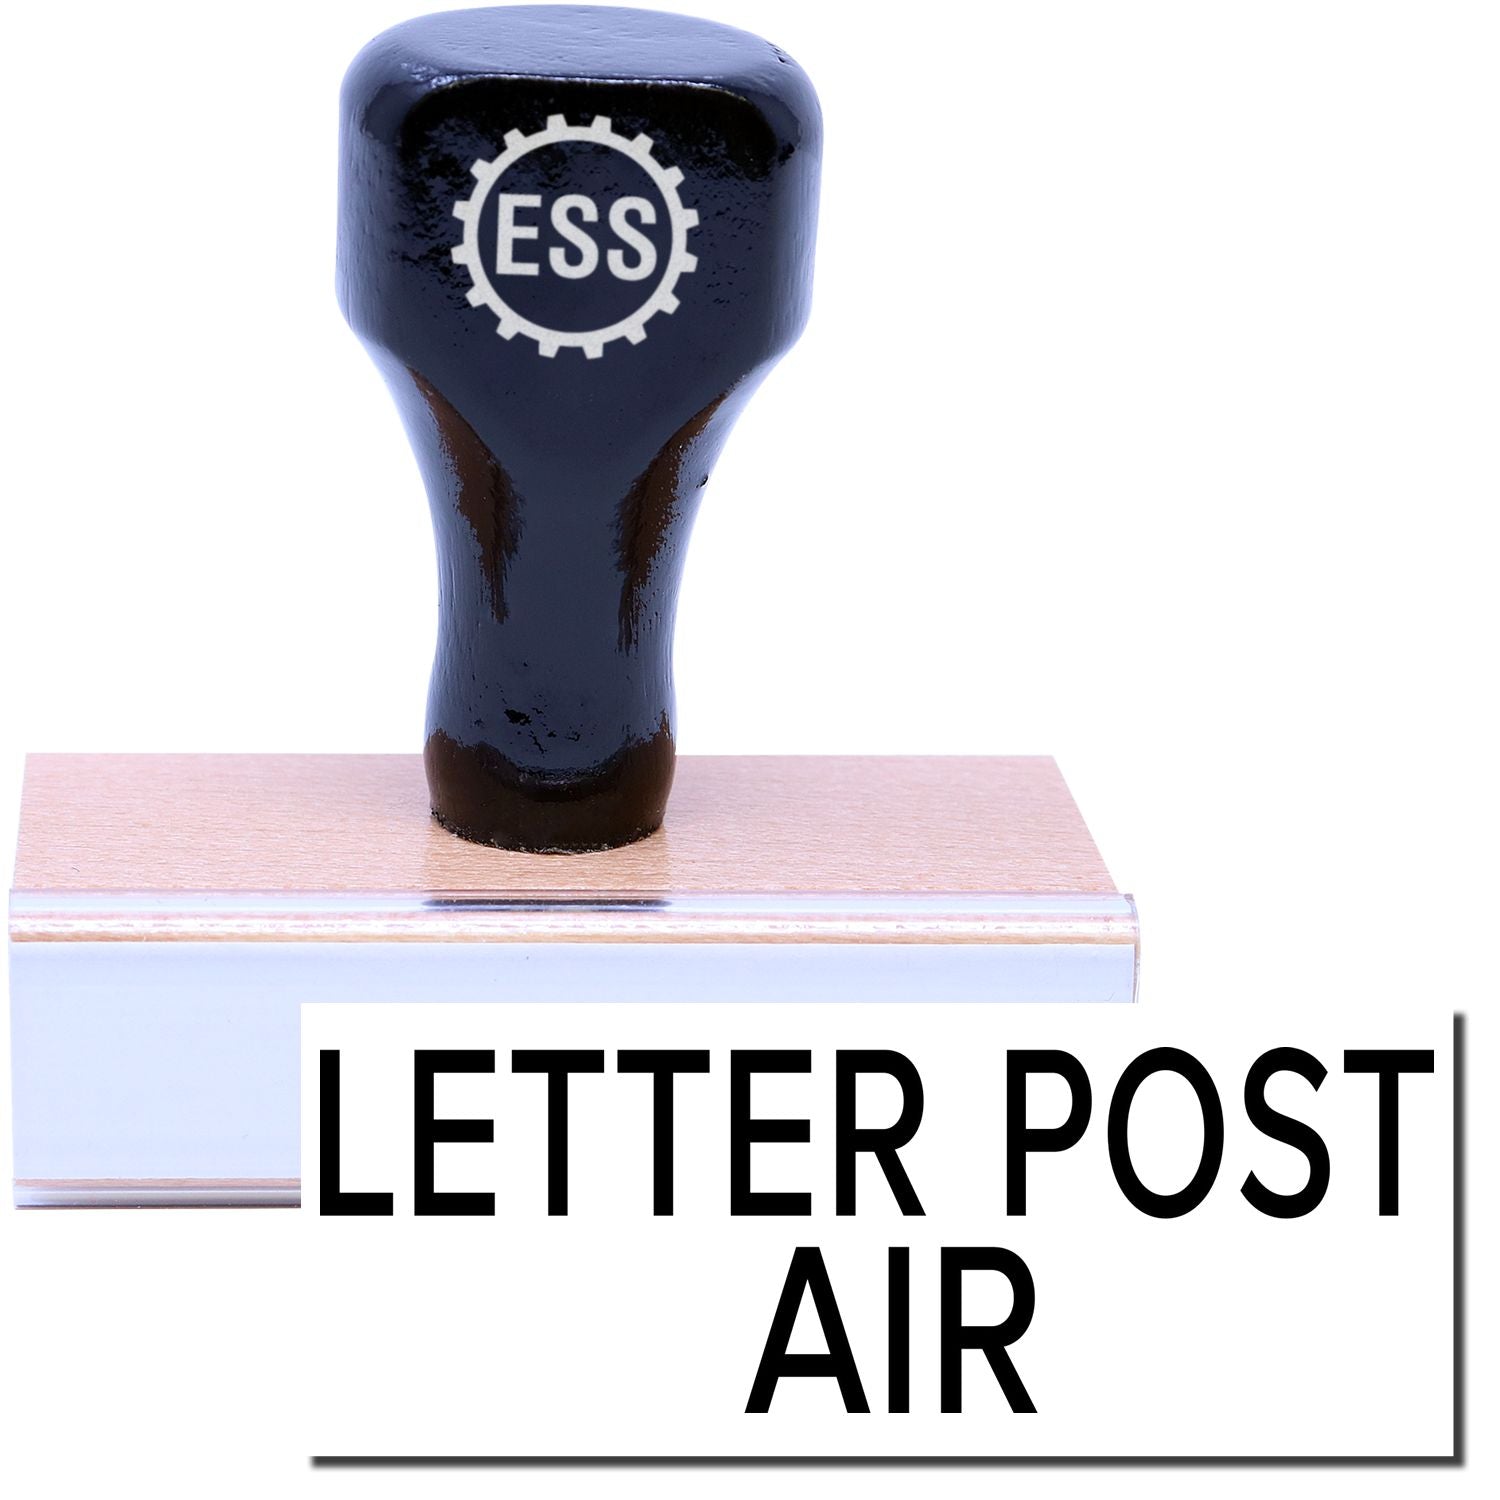 A stock office rubber stamp with a stamped image showing how the text "LETTER POST AIR" in a large font is displayed after stamping.